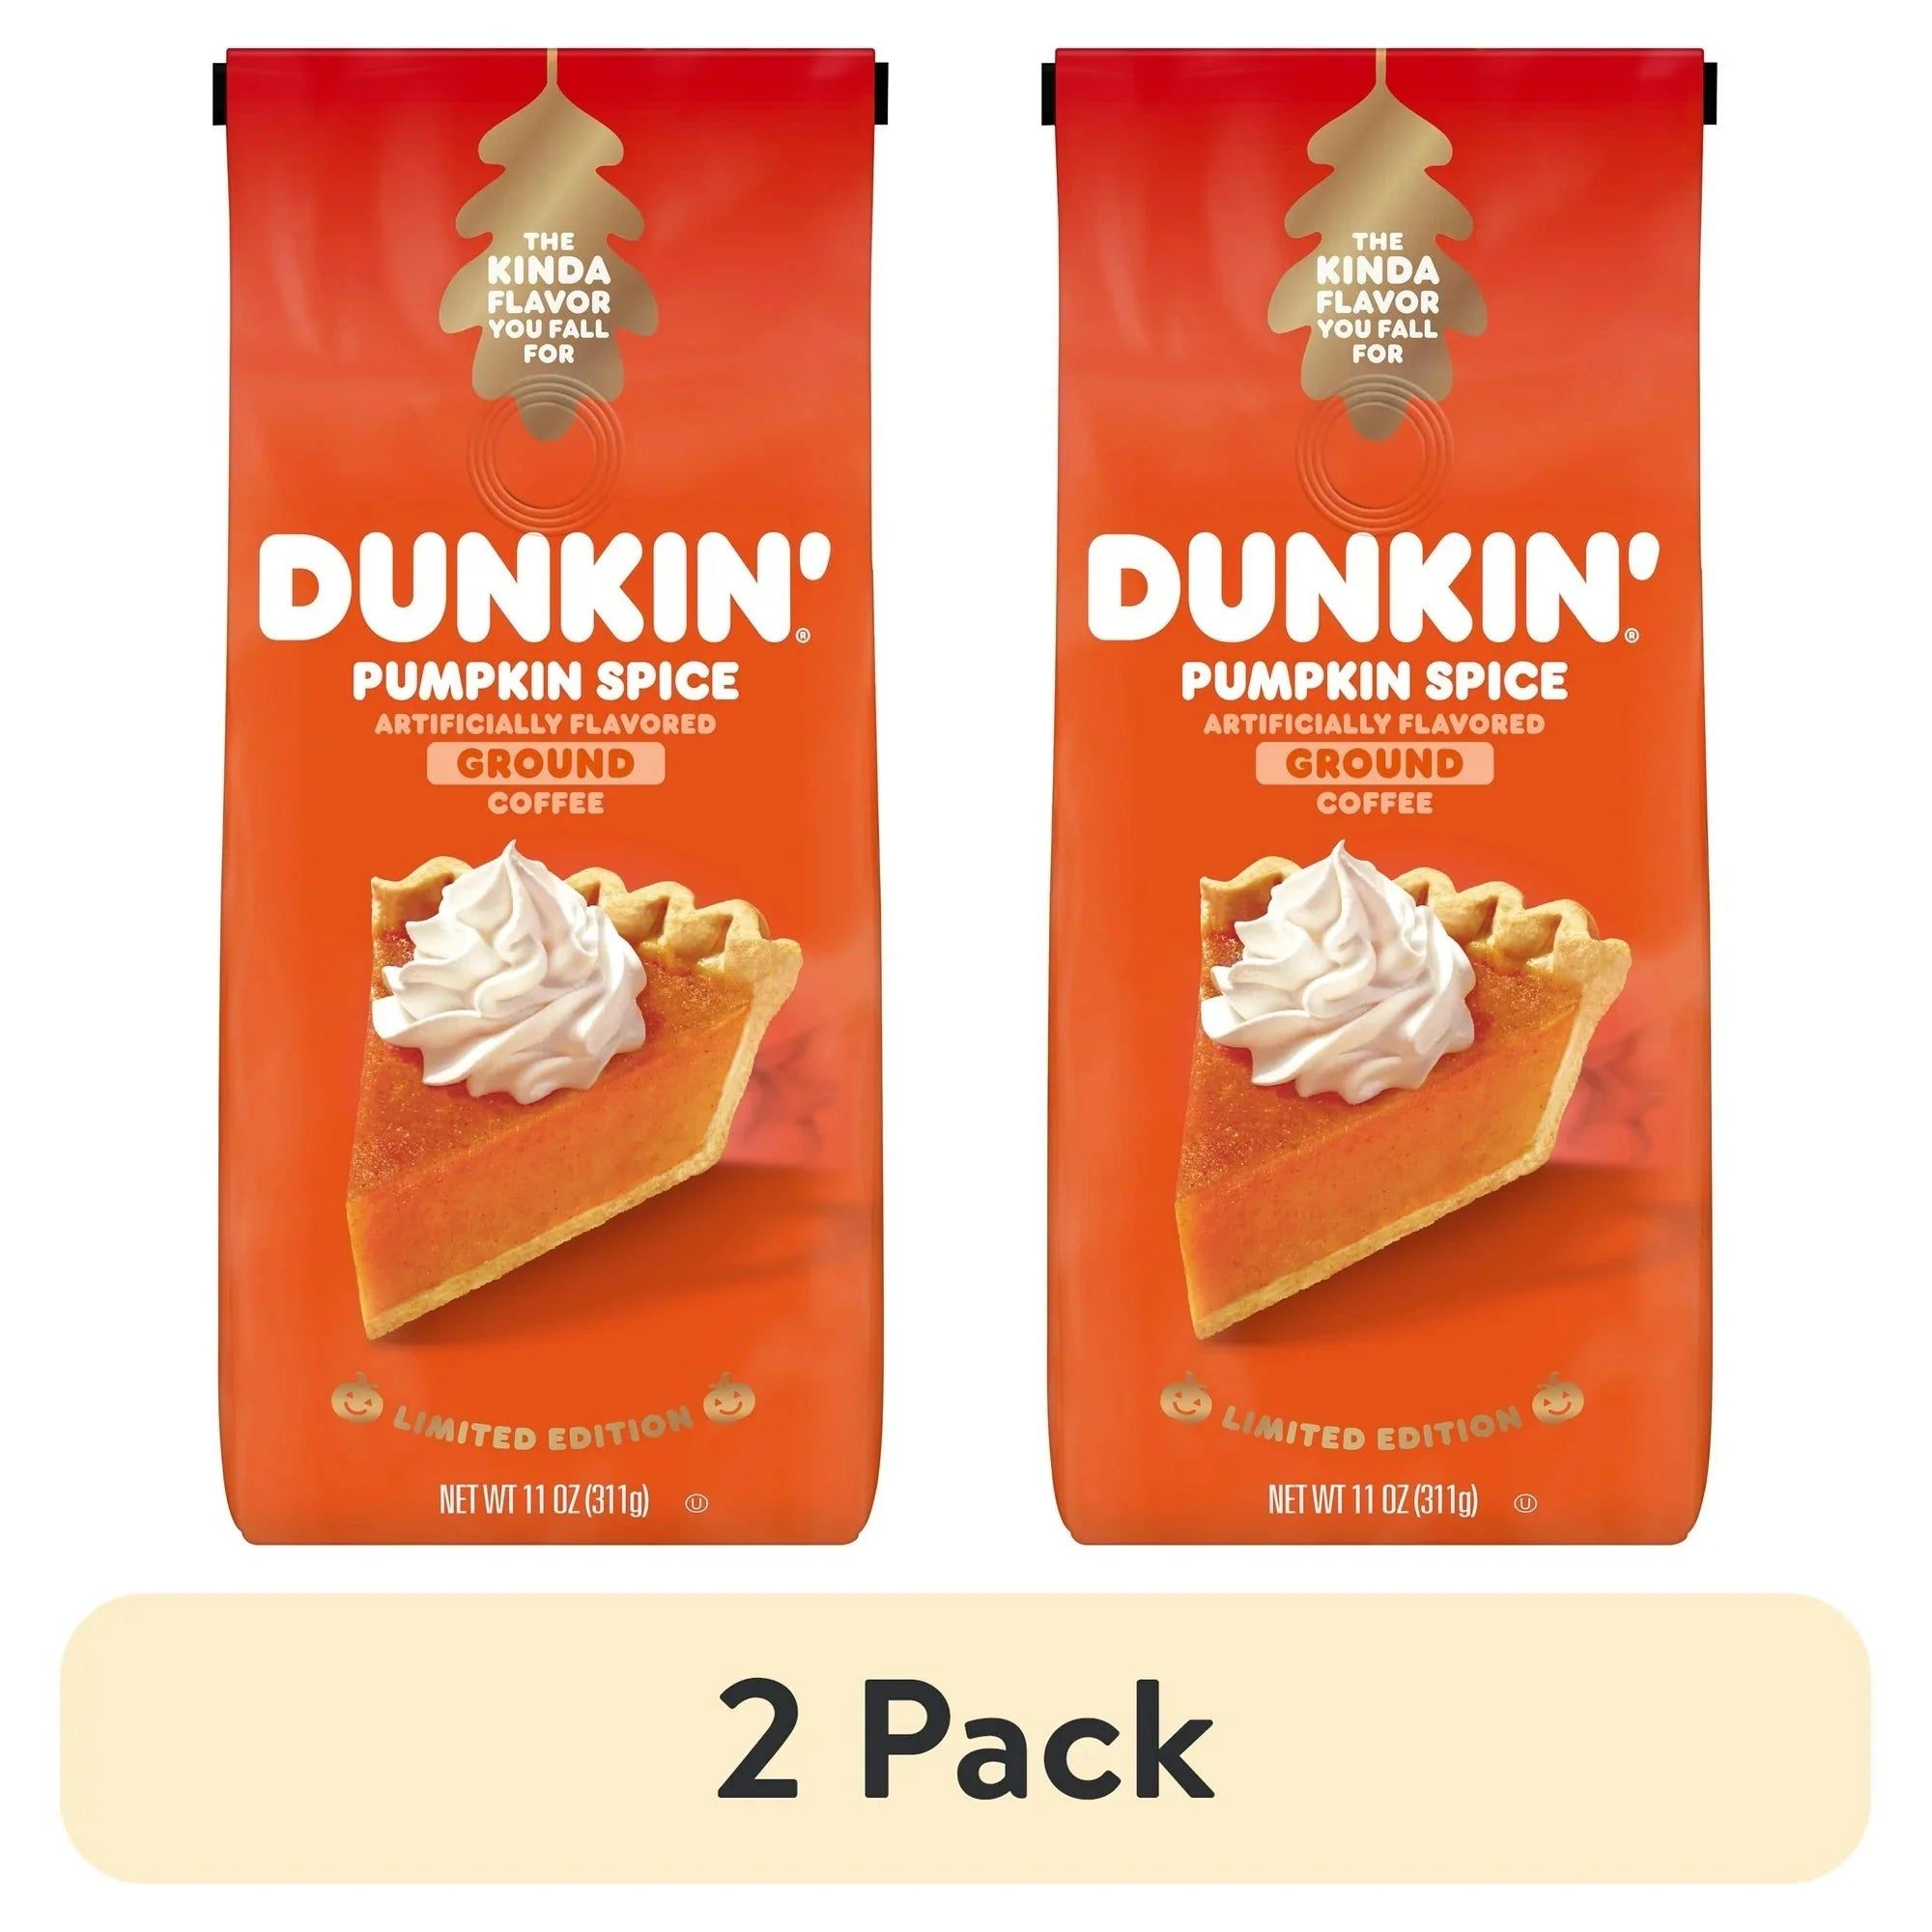 Wholesale prices with free shipping all over United States (2 pack) Dunkin Pumpkin Spice Ground Coffee, Limited Edition Fall Coffee, 11 oz. Bag - Steven Deals